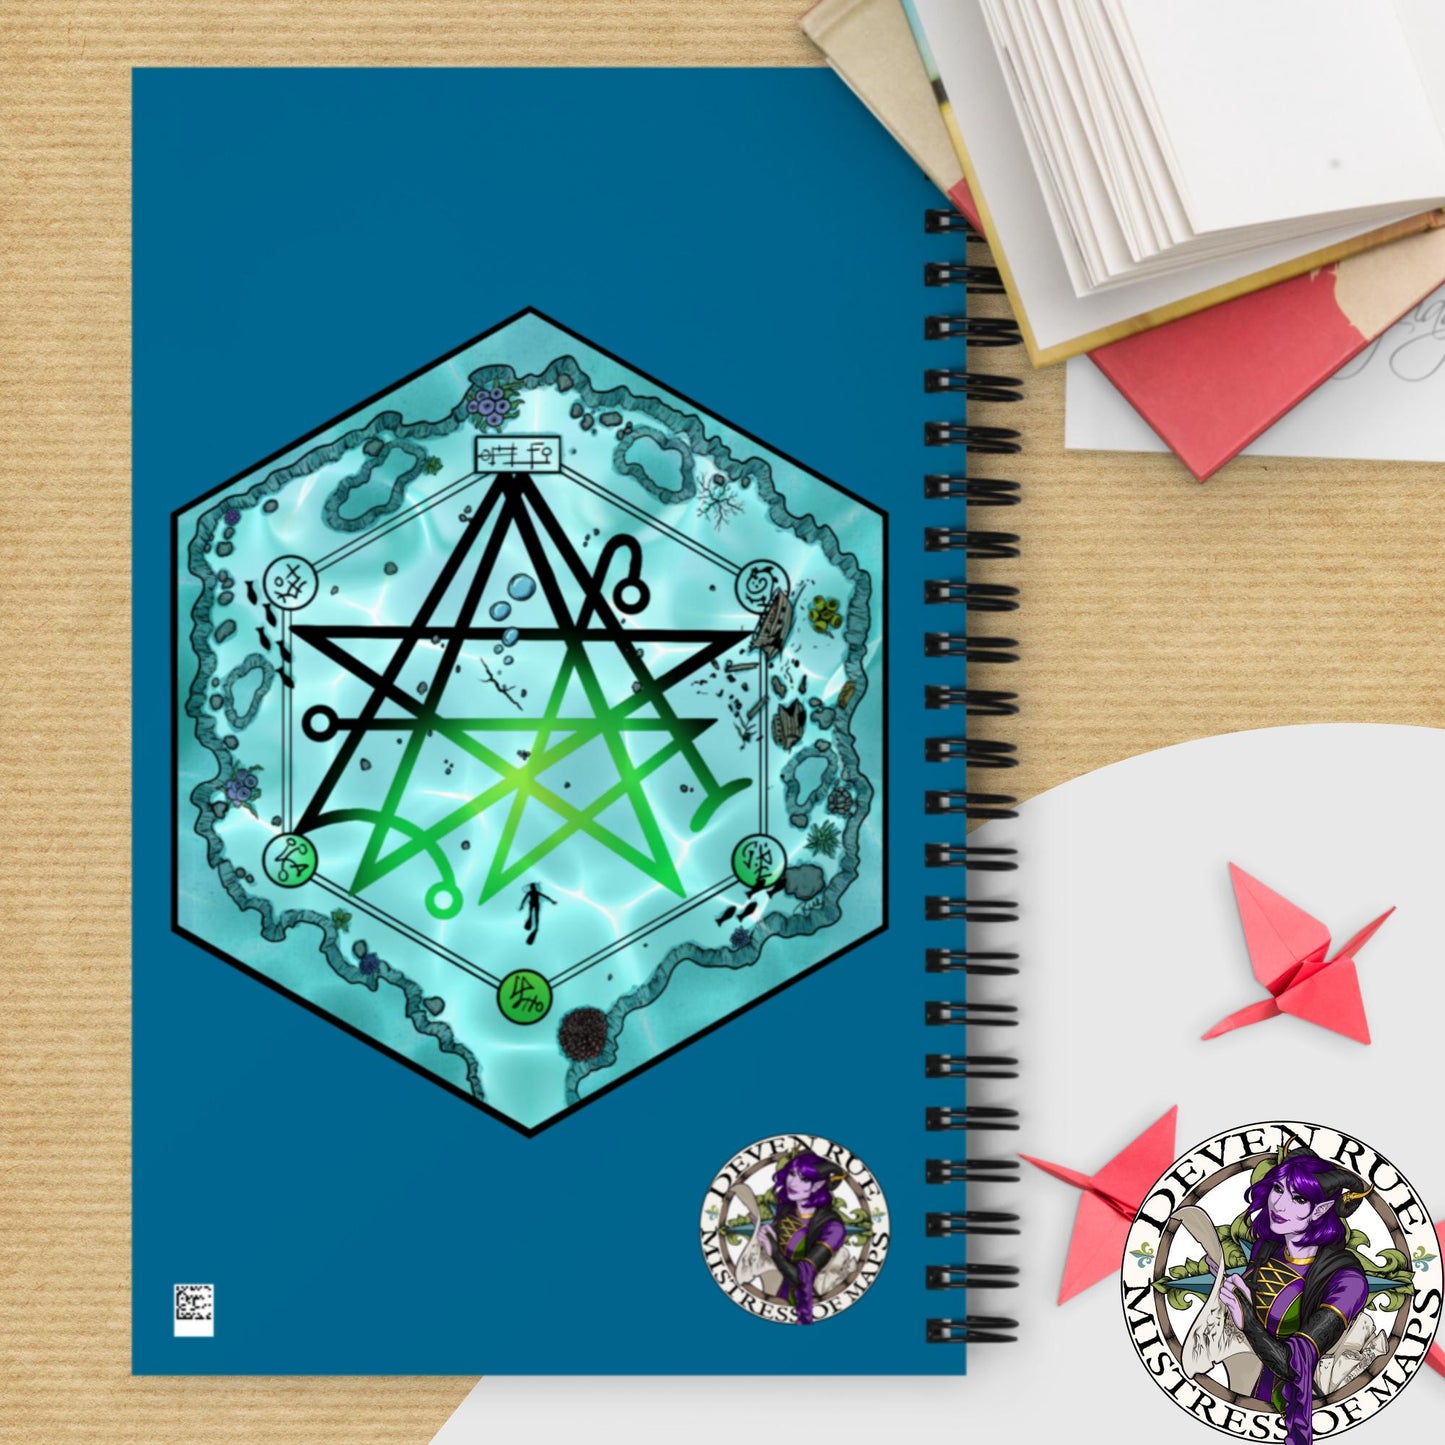 A teal spiral notebook with the Discovering the Gate hex map and the Deven Rue logo on the back.